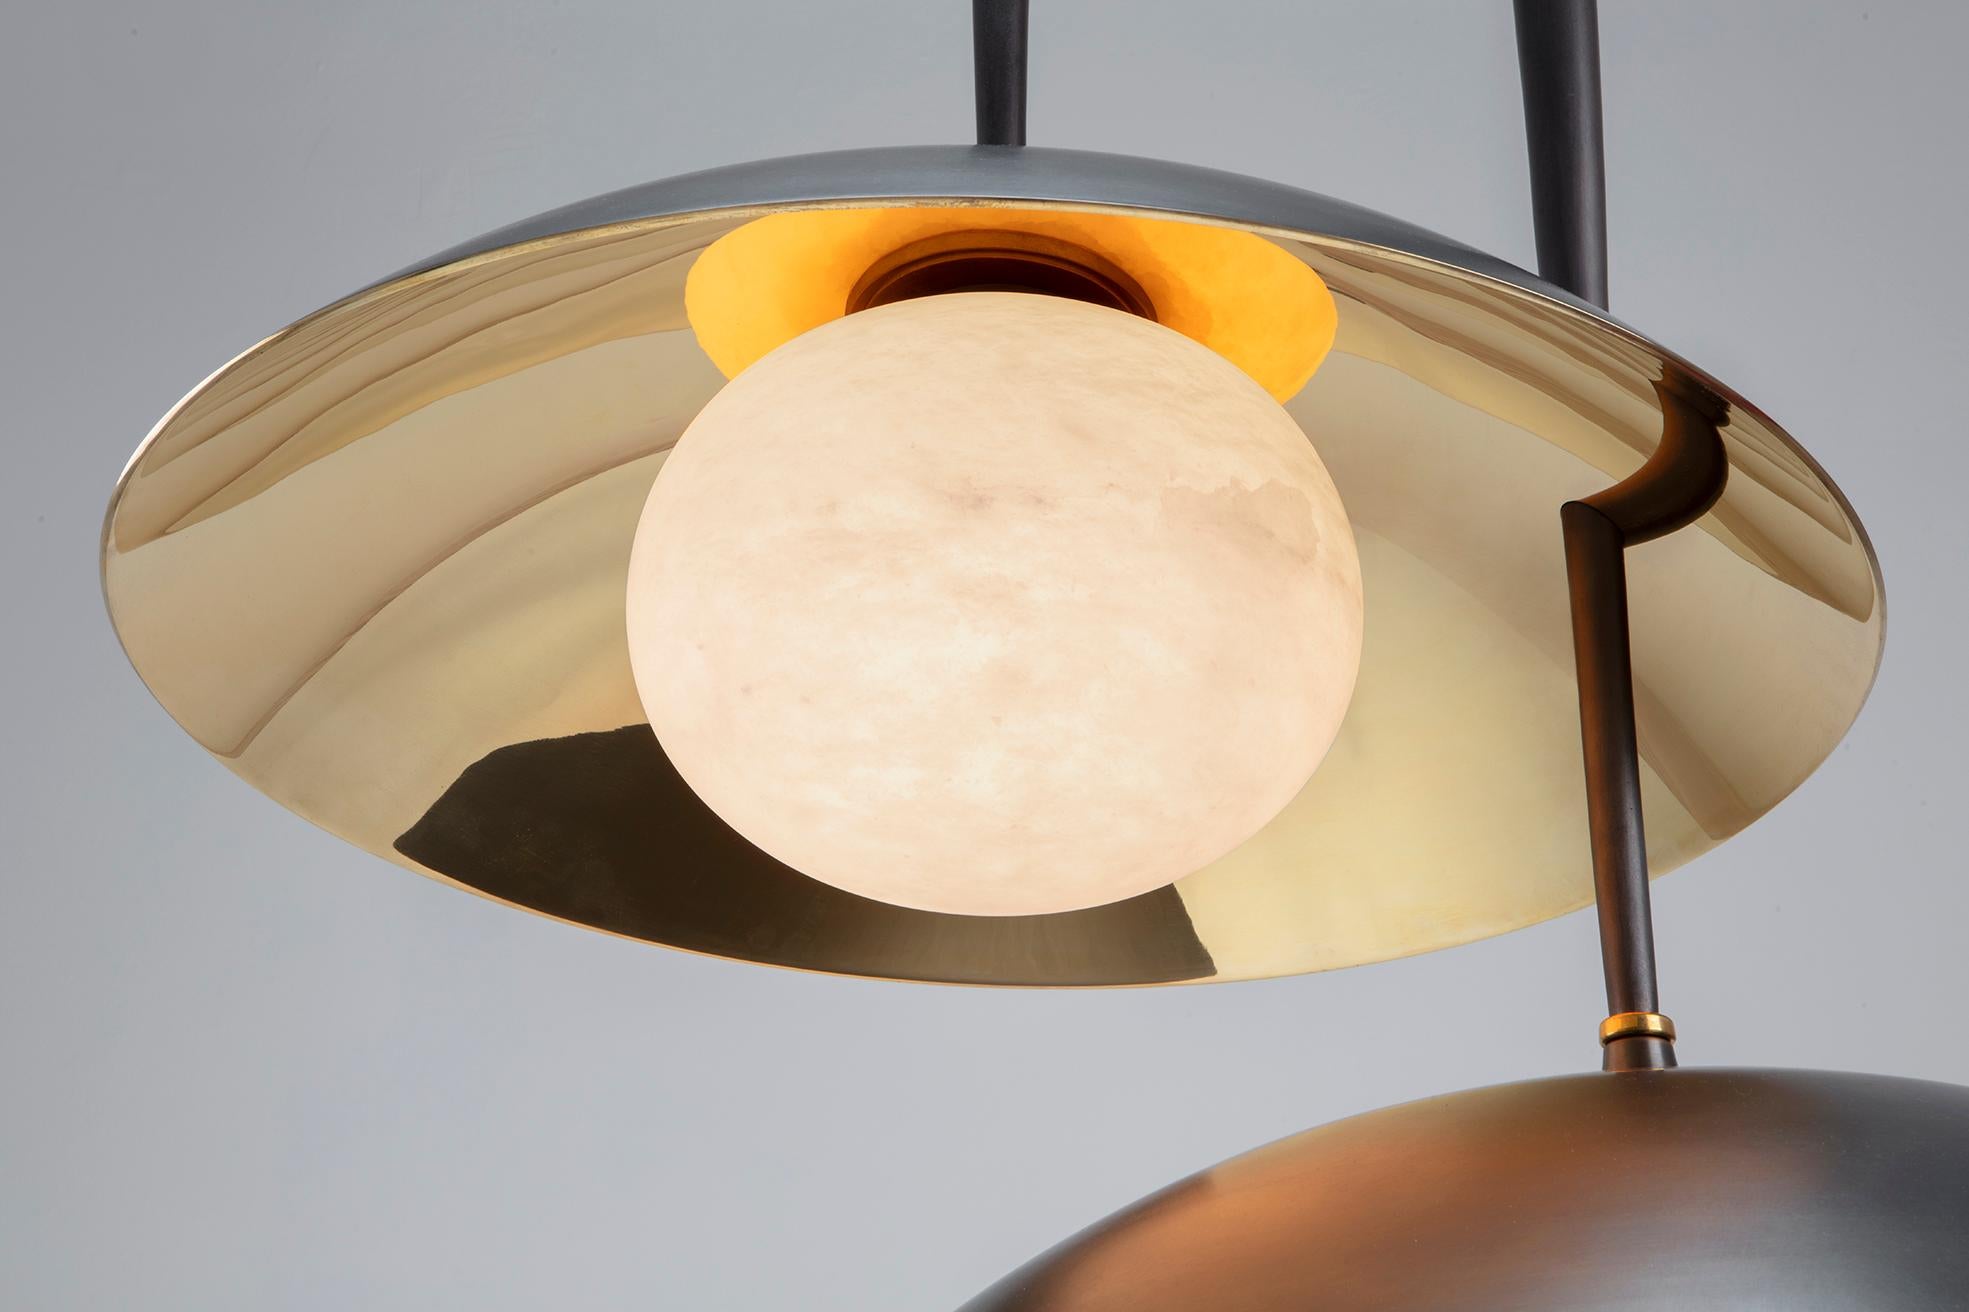 Cast bronze, polished bronze and alabaster pendant. The Tana Pendant is part of the inaugural Alexandra Champalimaud, capsule collection for Charles Burnand. The collection takes its inspiration from the volume and graciousness of North American